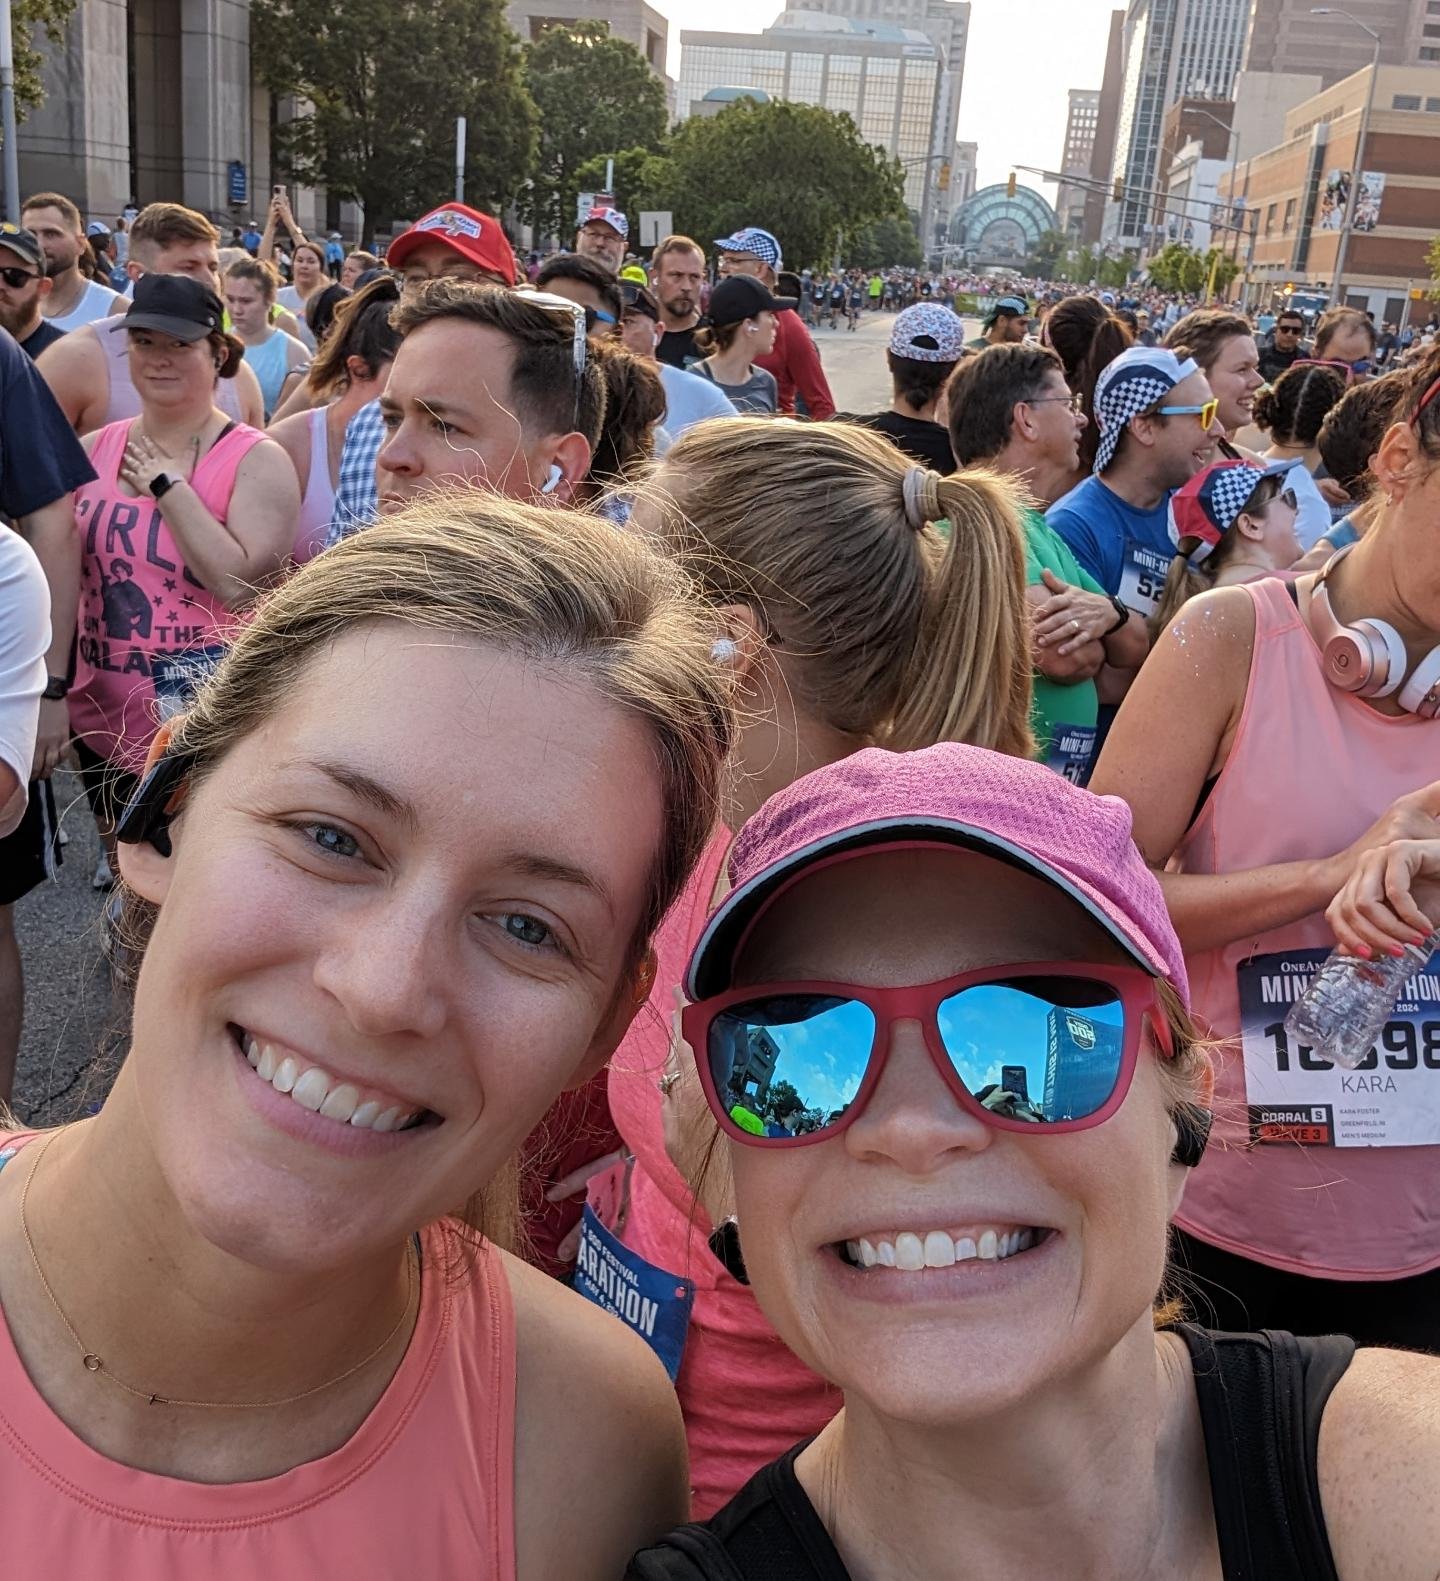 How it started / how it's going 🏁 Finished the @500festival Mini Marathon with 2:10:33 time and the best race buddy ever! We're closing out the day with carbs, the couch and a prayer that we can walk down the stairs in the morning.